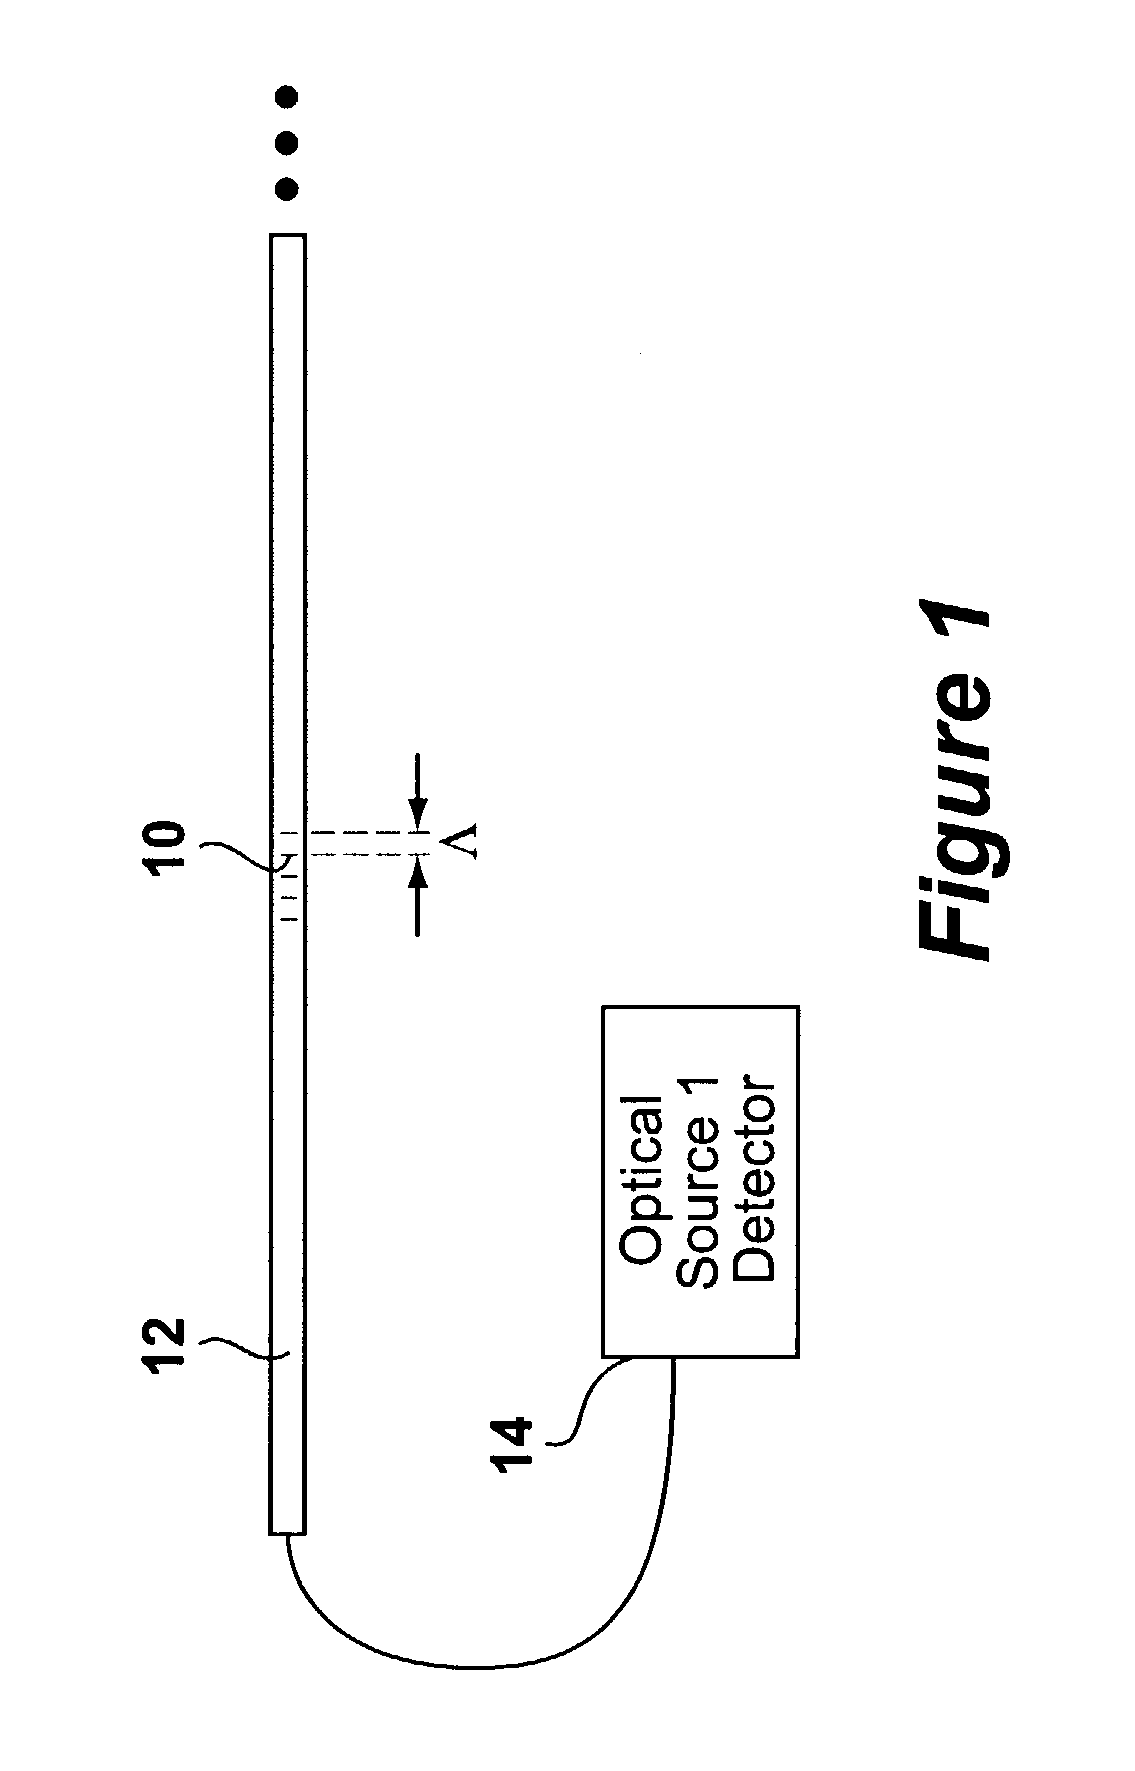 Optical sensor using a long period grating suitable for dynamic interrogation